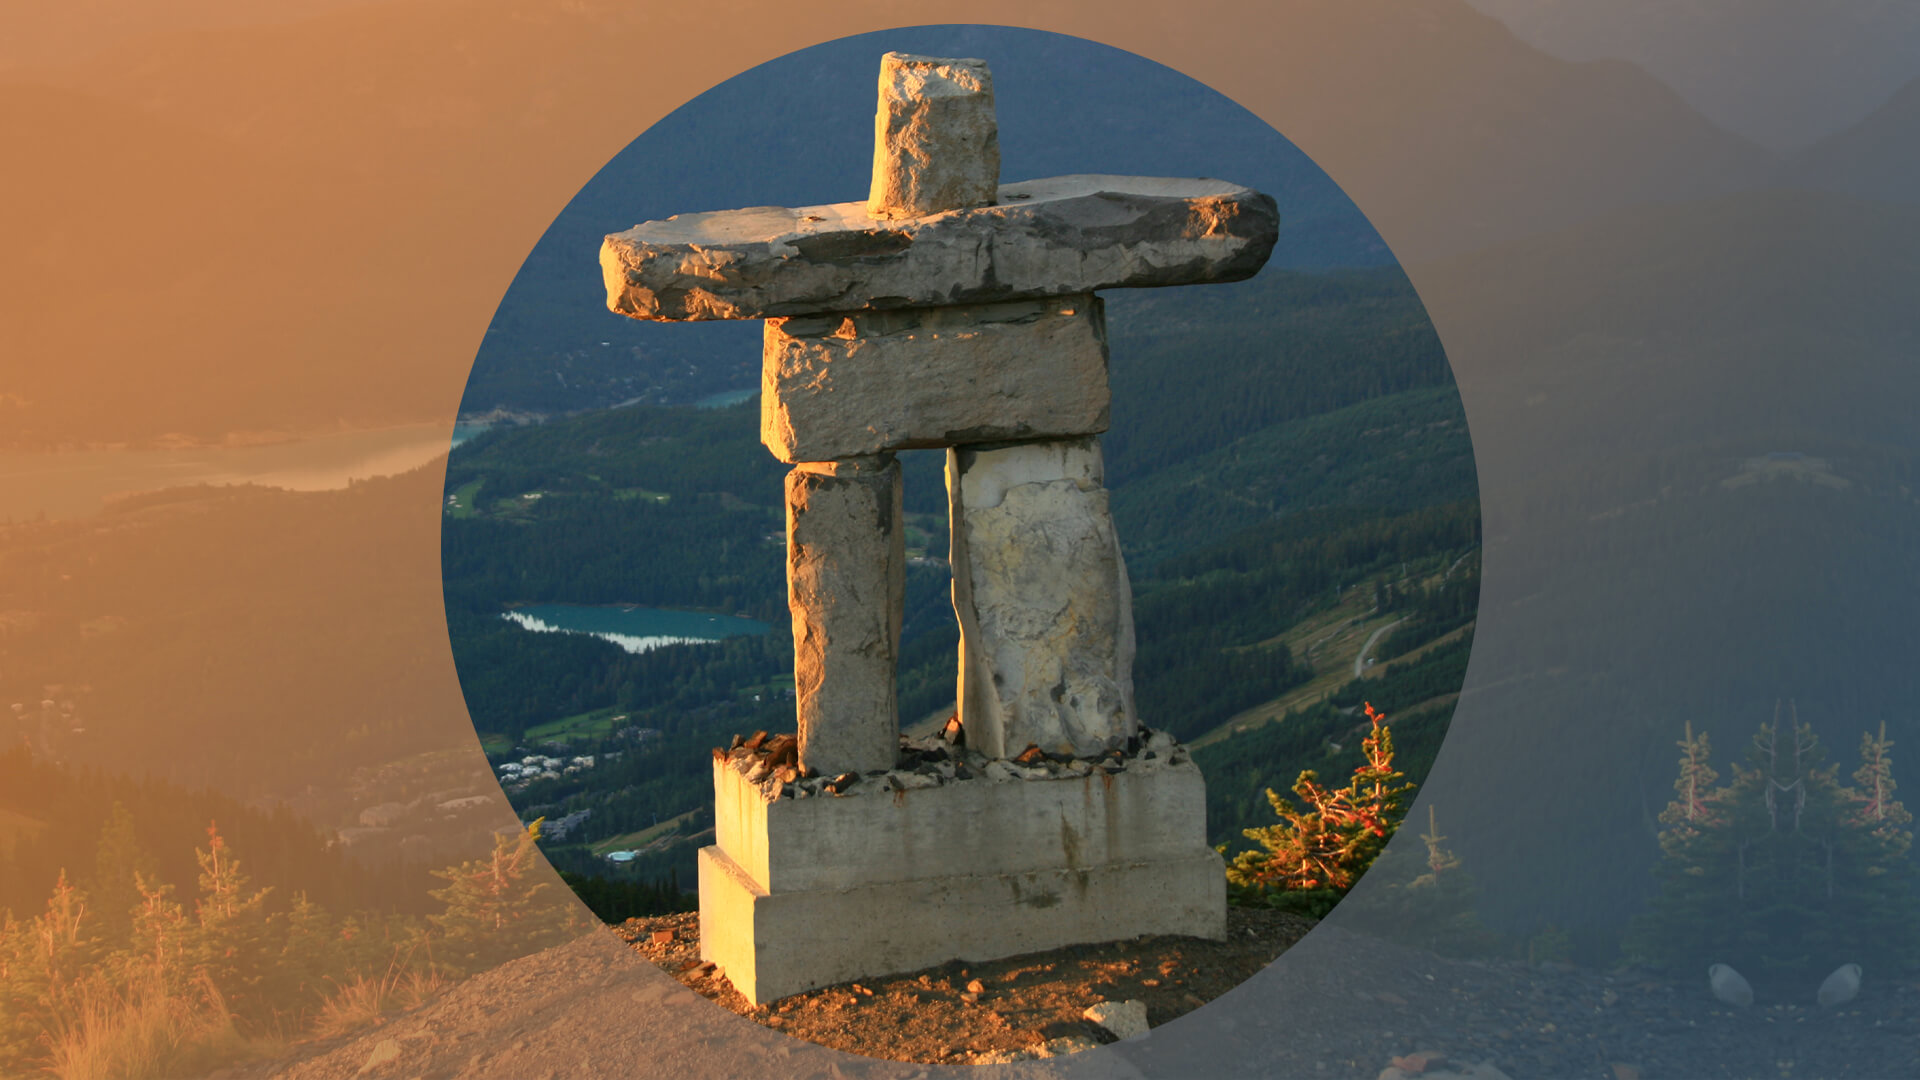 An inukshuk in Whistler, BC, with lake and mountains in the background